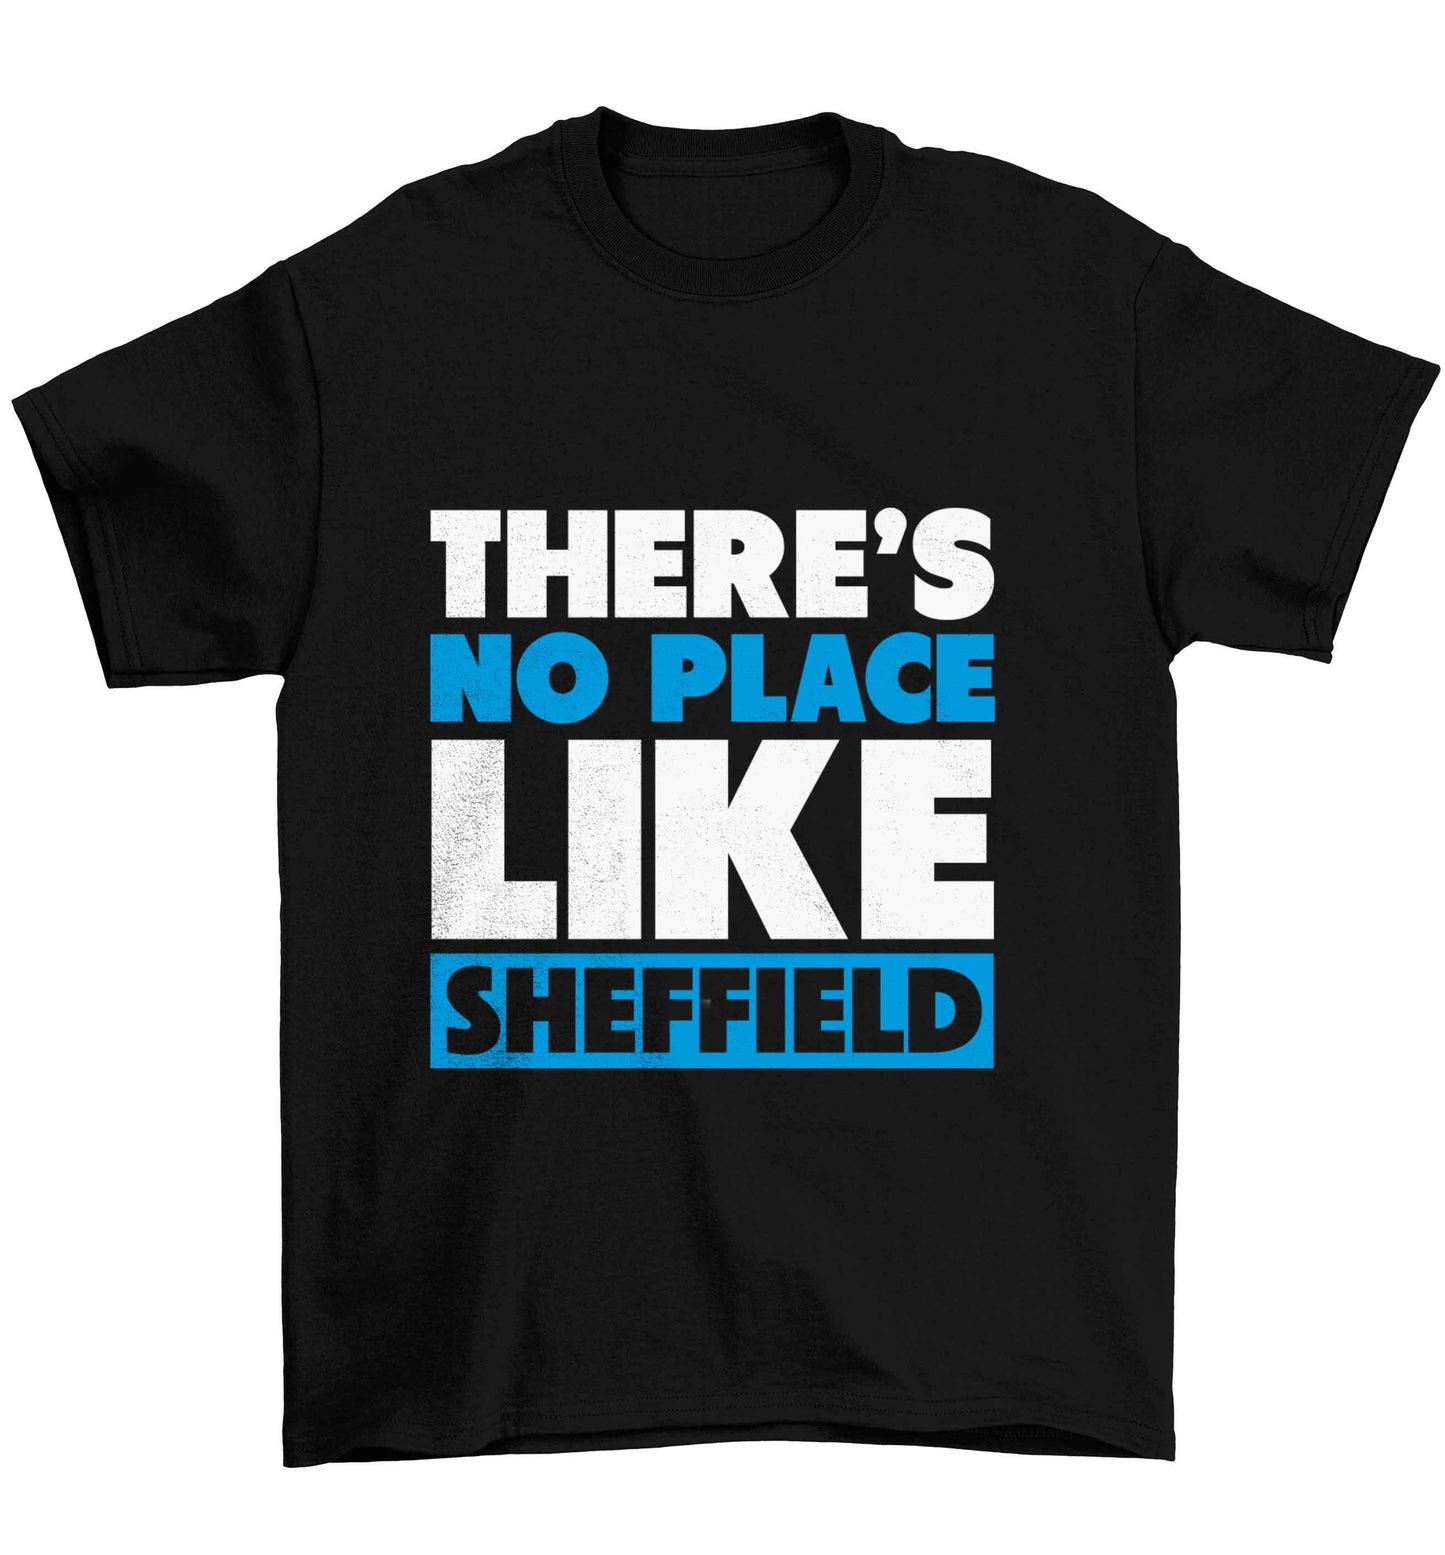 There's no place like Sheffield Children's black Tshirt 12-13 Years